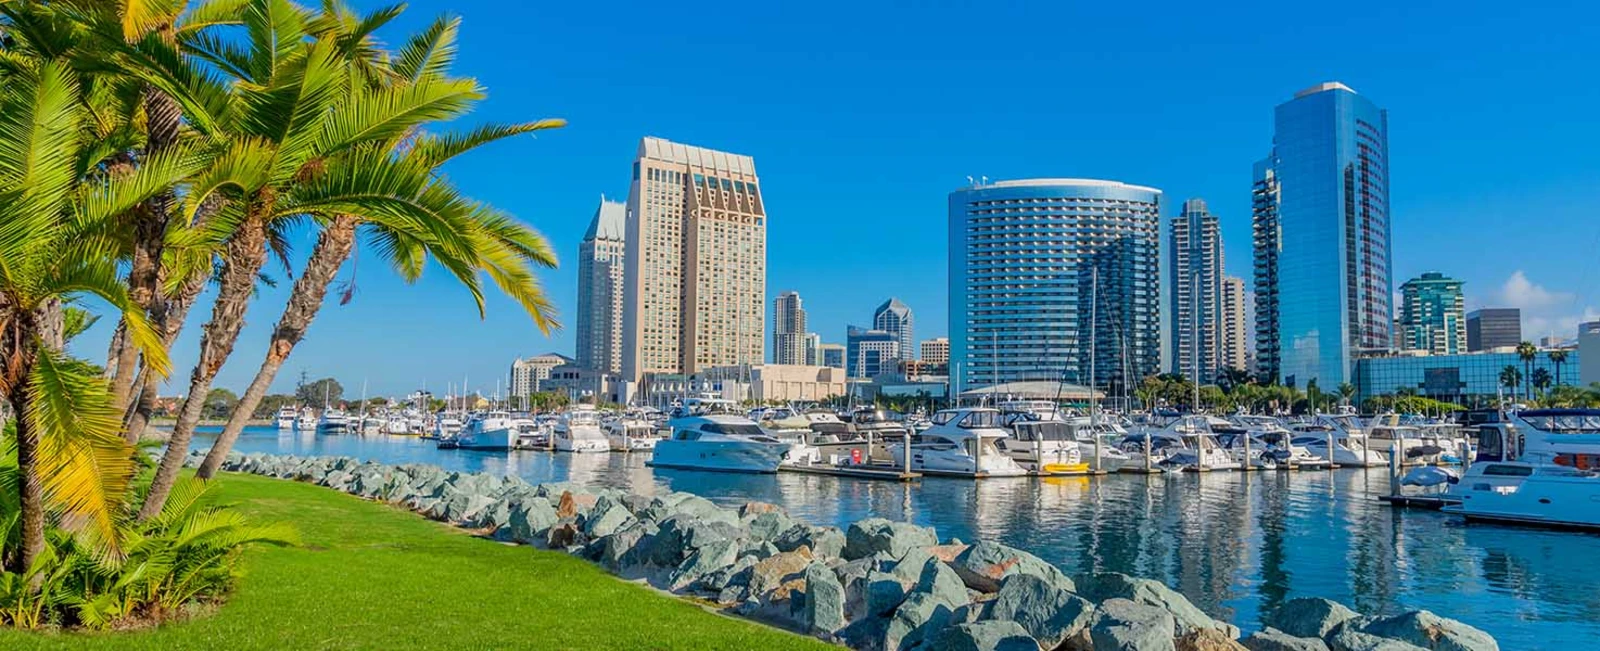 67 Things To Do in San Diego When You Visit in 2023 - Trip Canvas